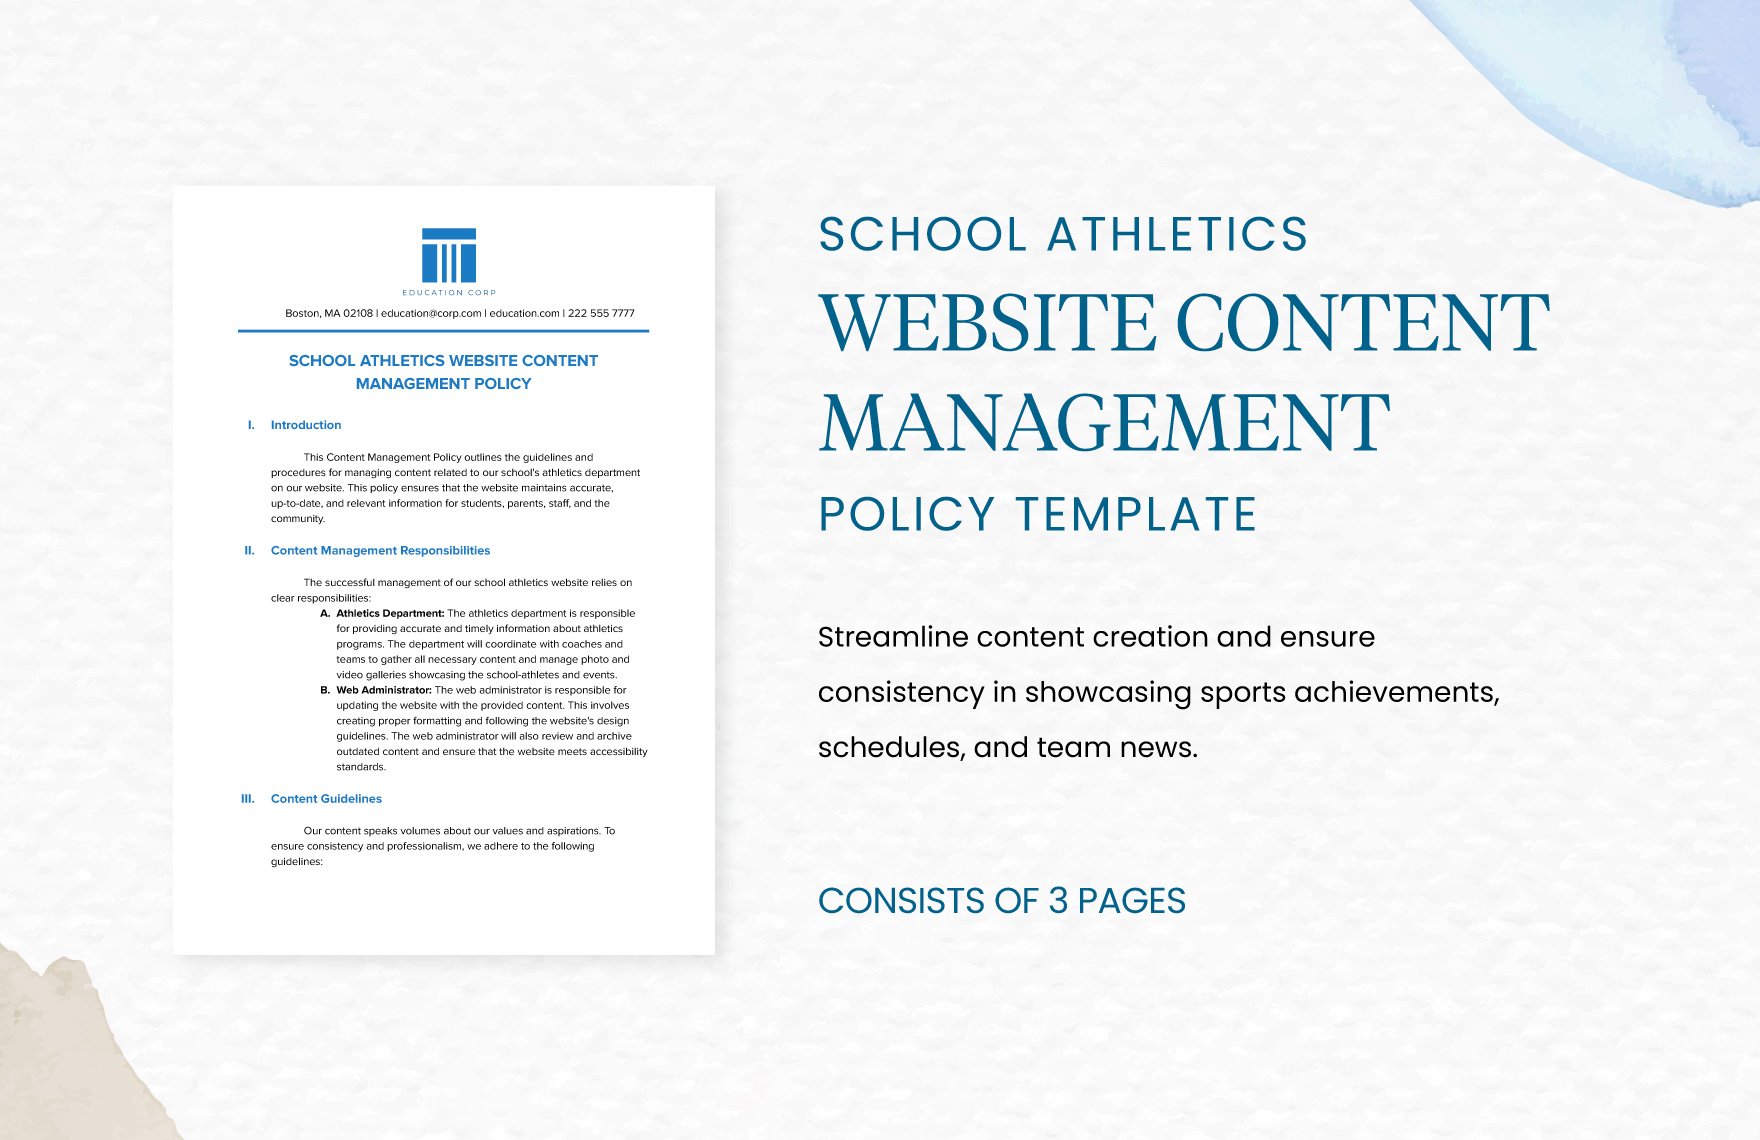 School Athletics Website Content Management Policy Template